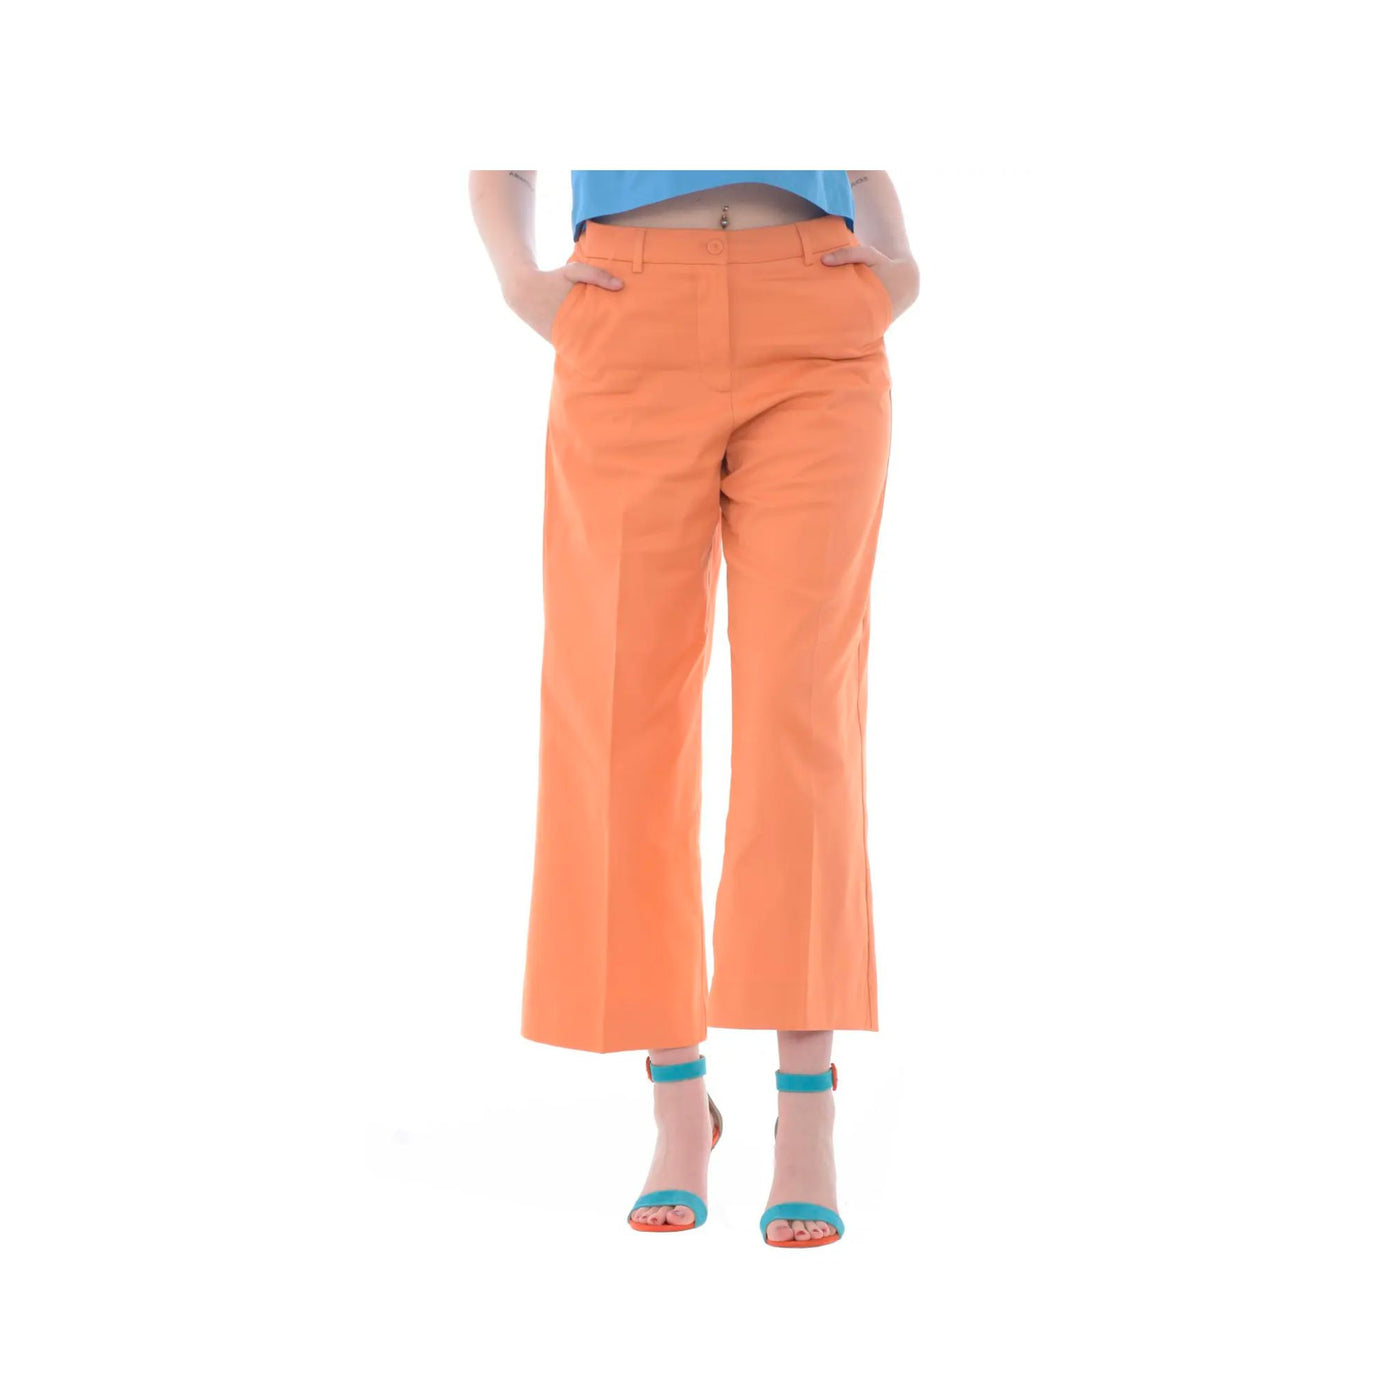 Women's trousers with wide cut